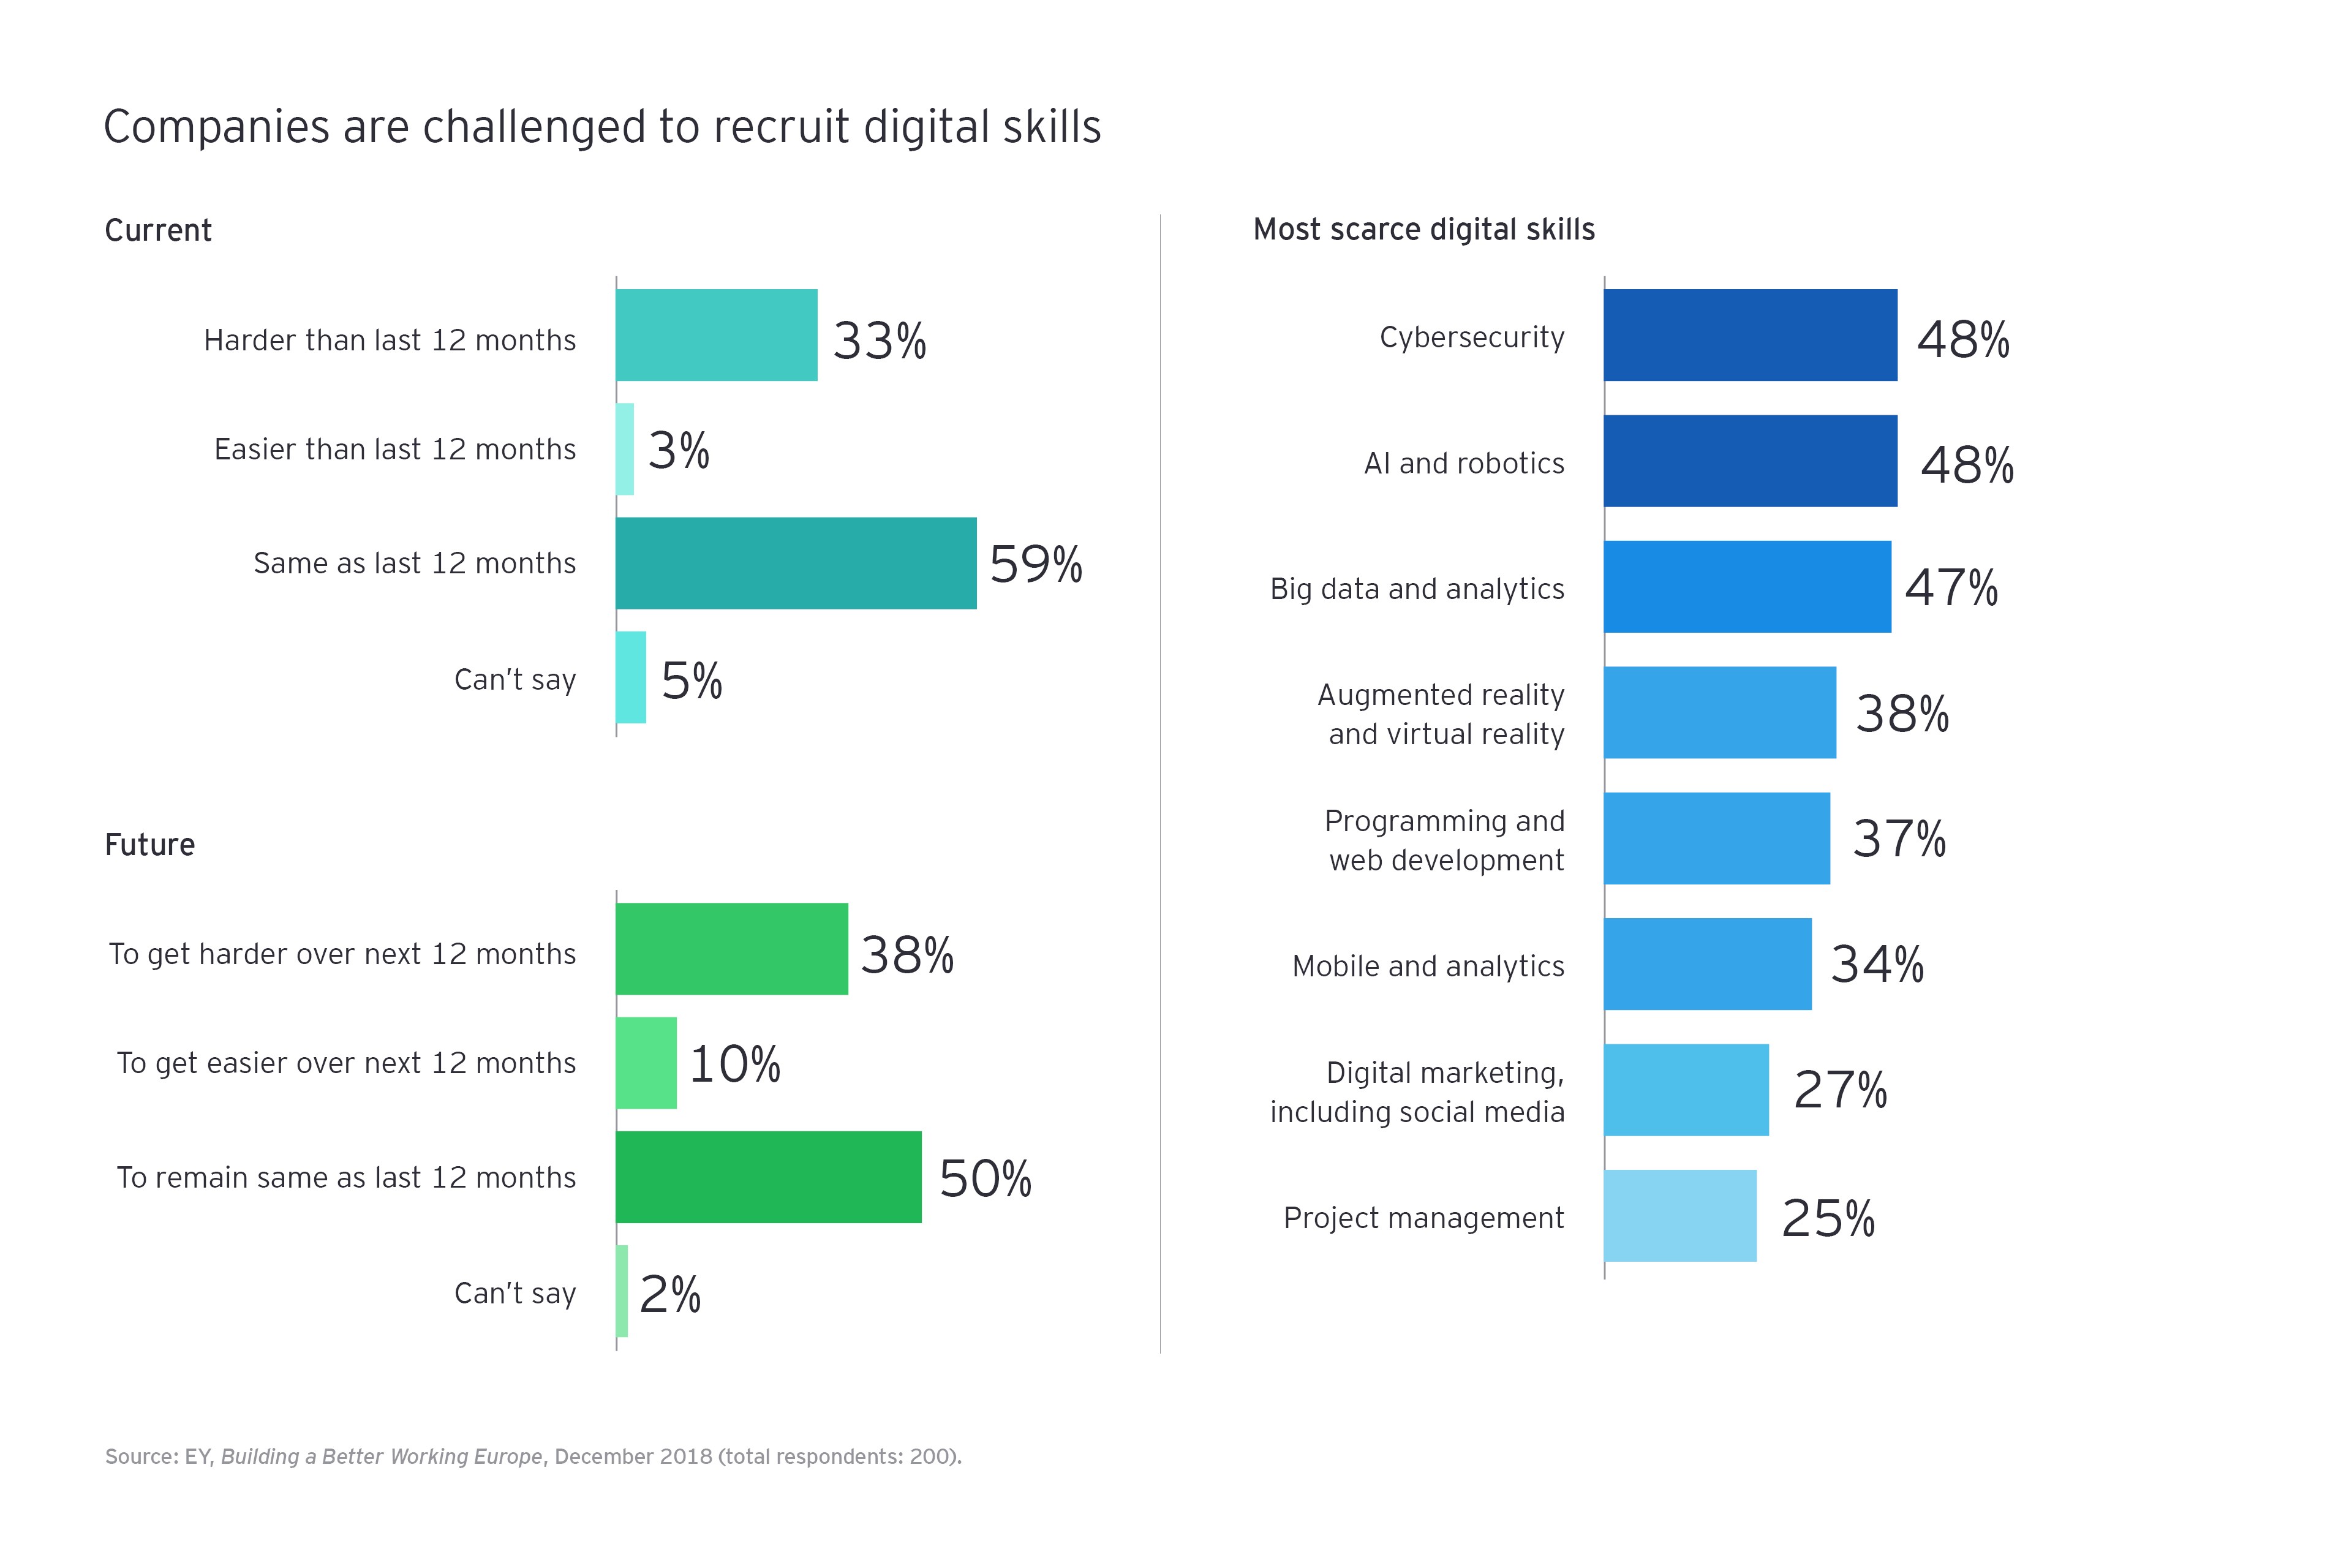 Companies are challenged to recruit digital skills